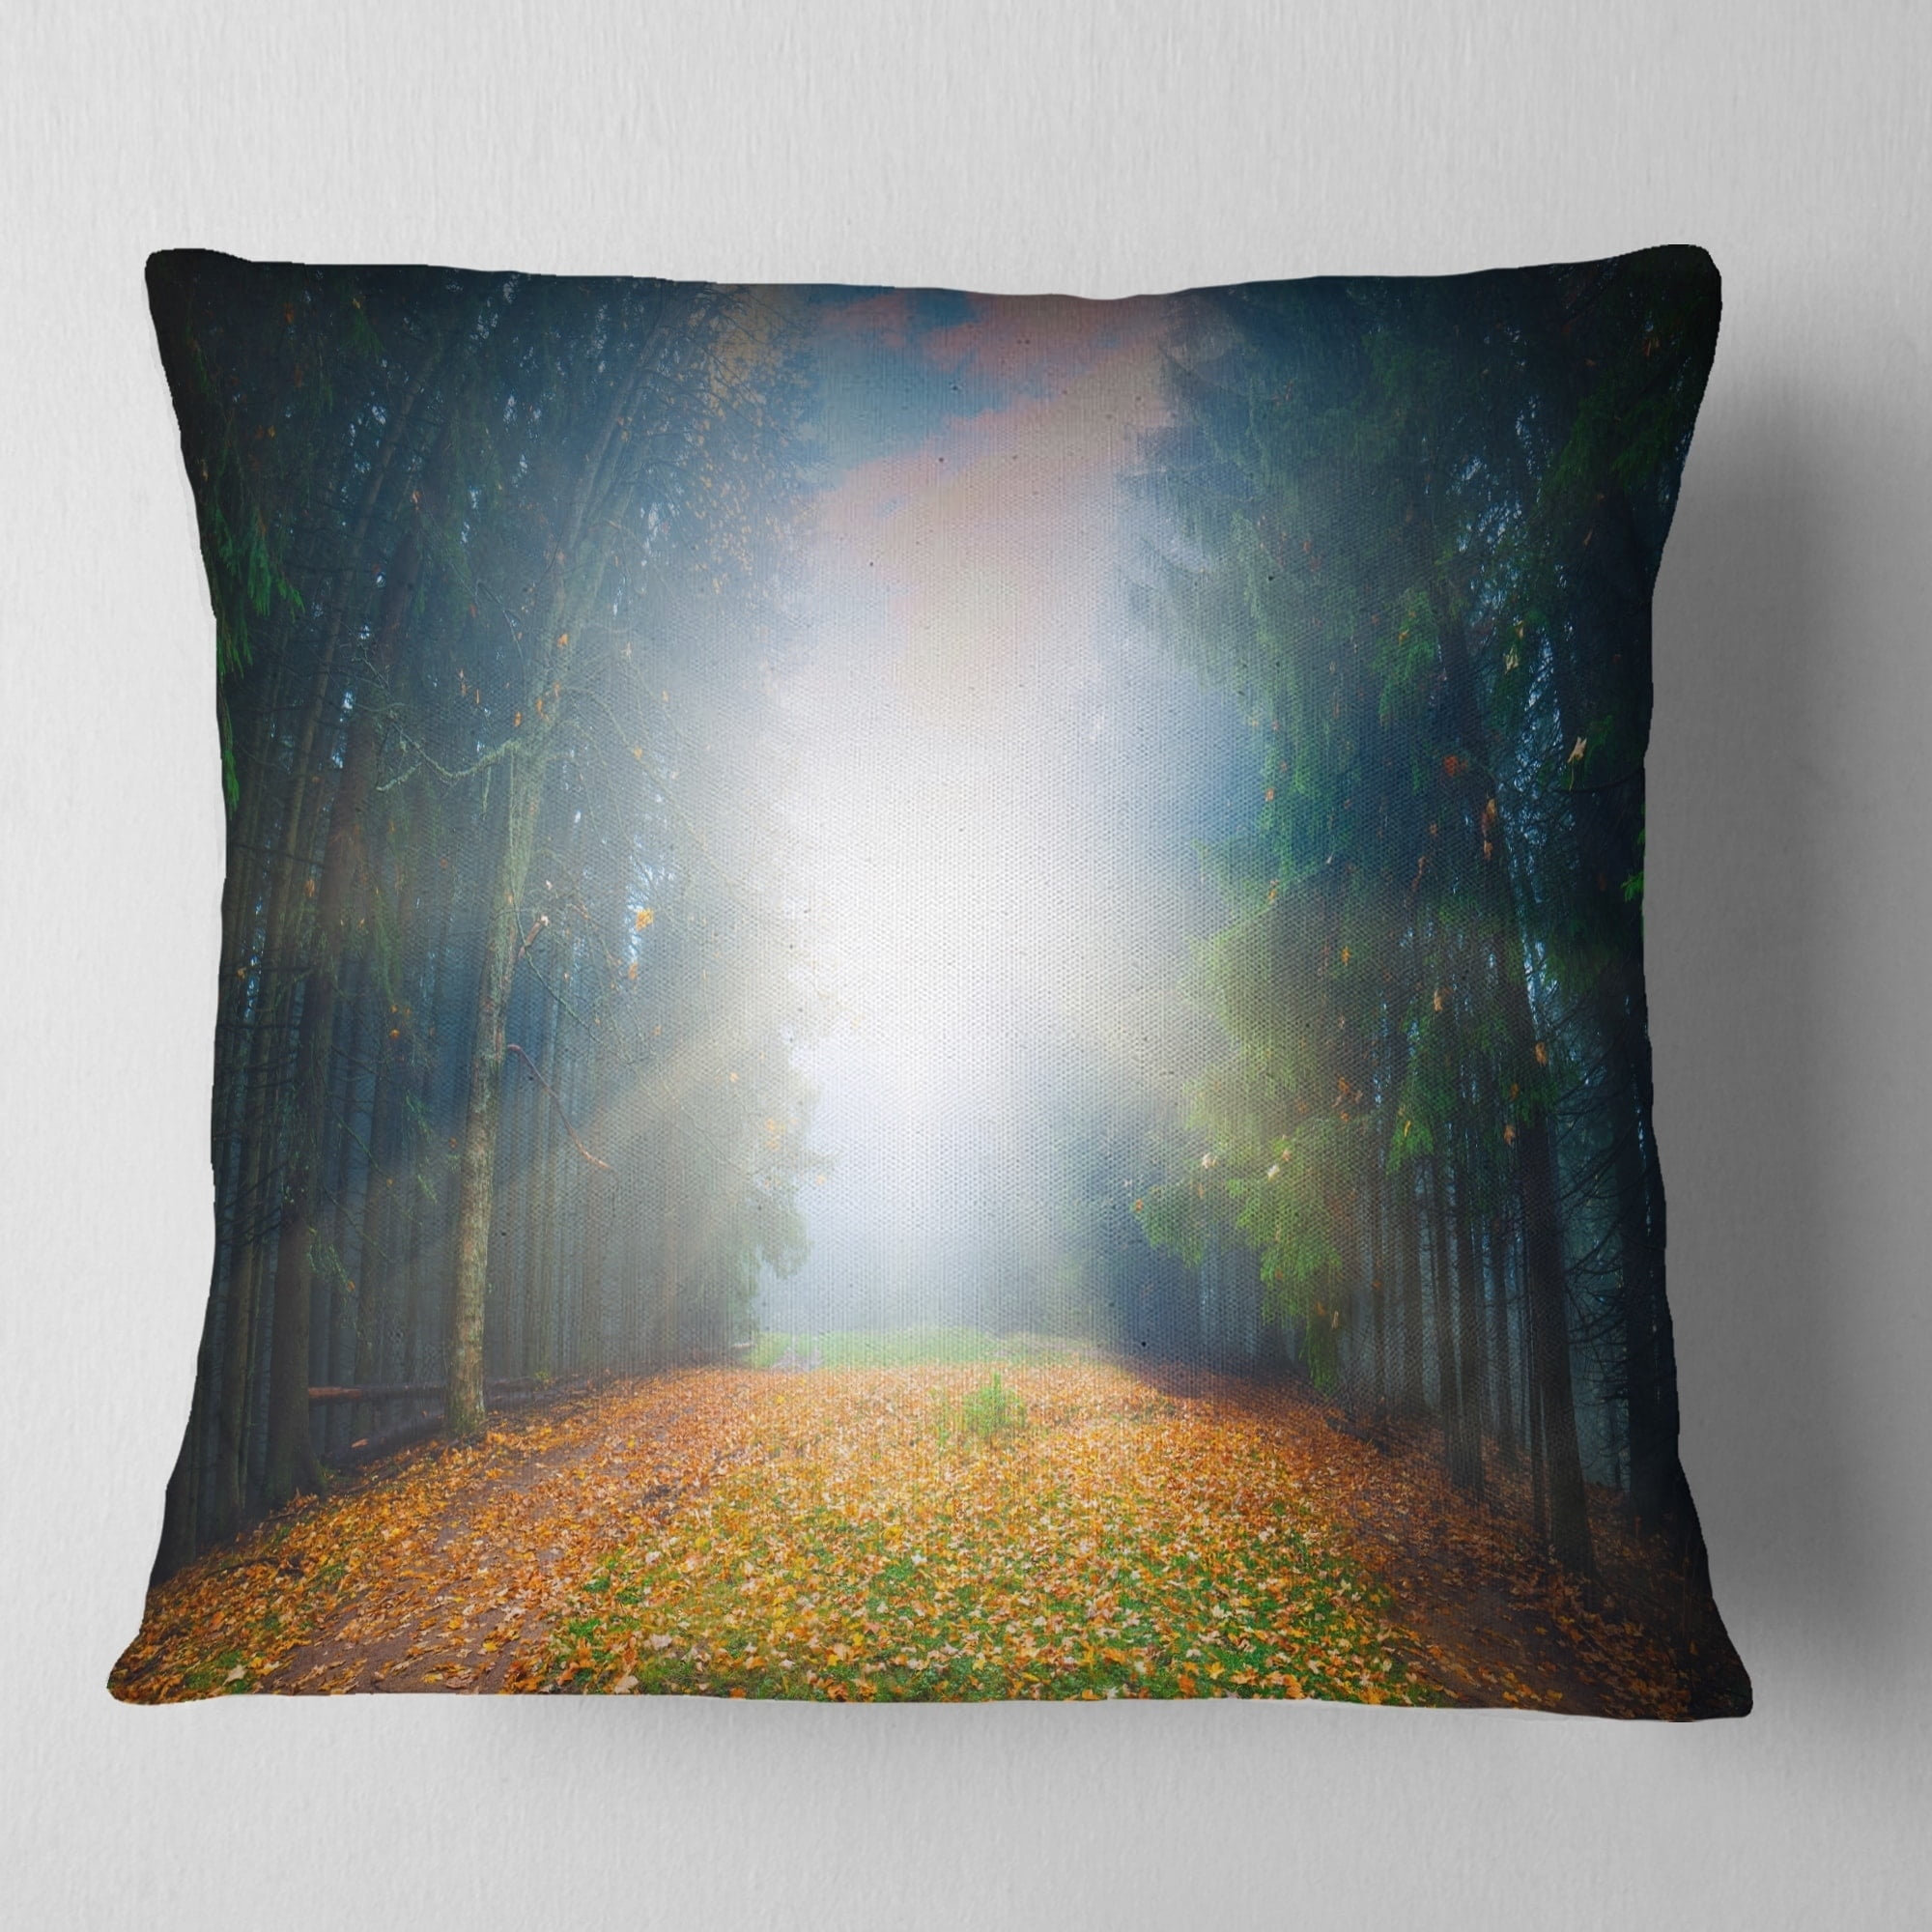 Sofa Throw Pillow 26 x 26 Designart CU9717-26-26 Rising Sun Over Colorful Forest Landscape Photo Cushion Cover for Living Room